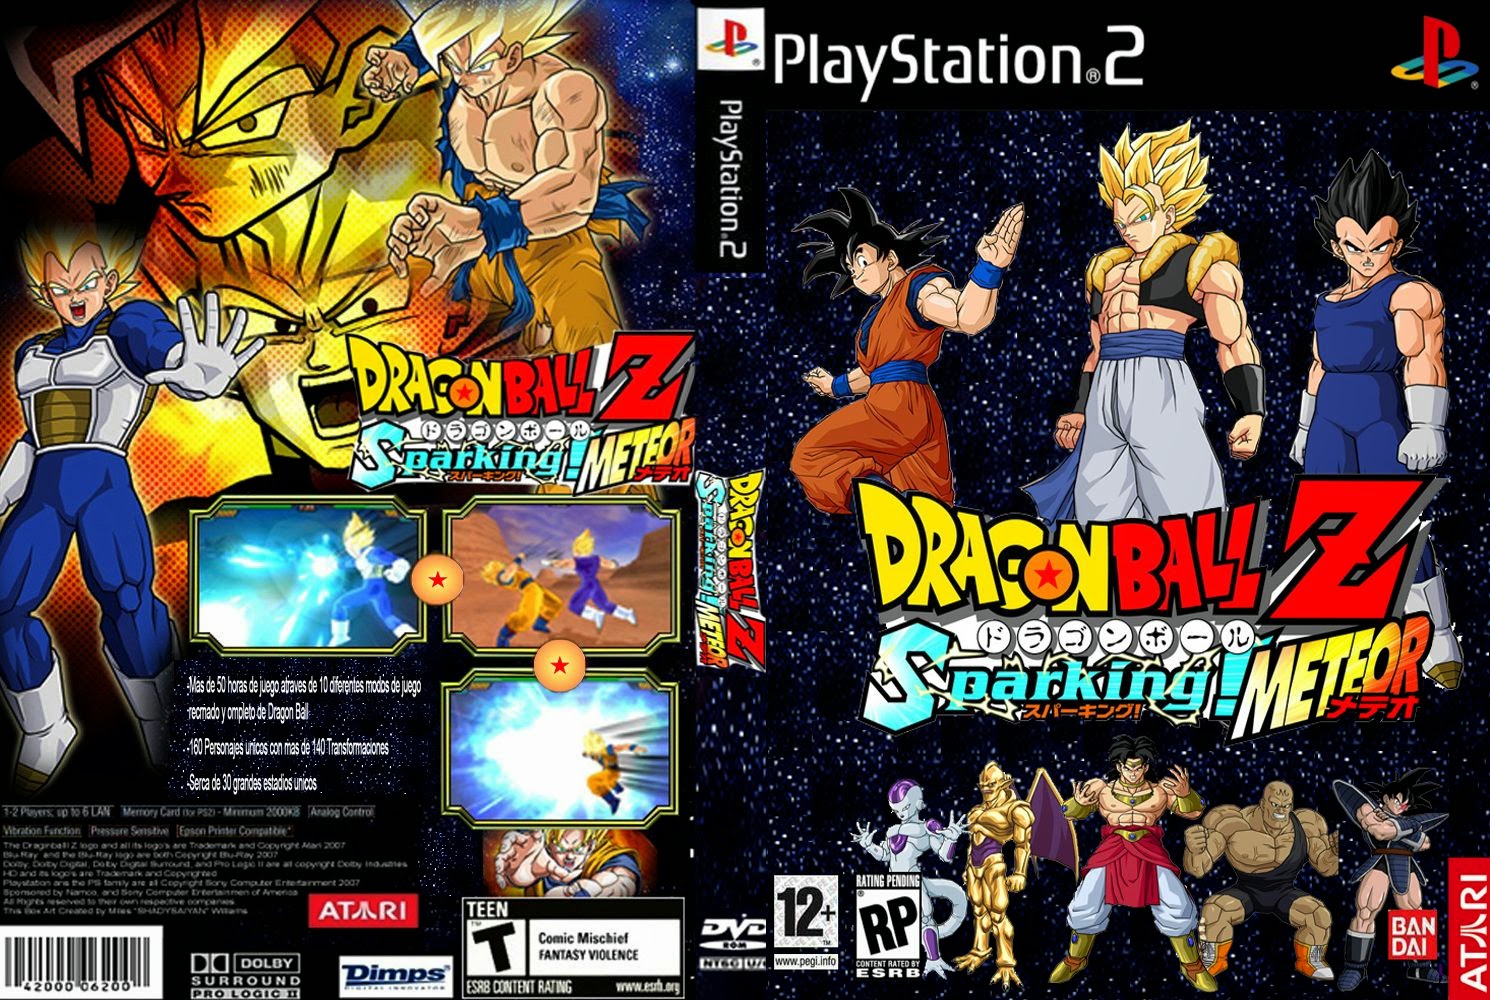 Dragon Ball Z Sparking Meteor Ps2 Iso S